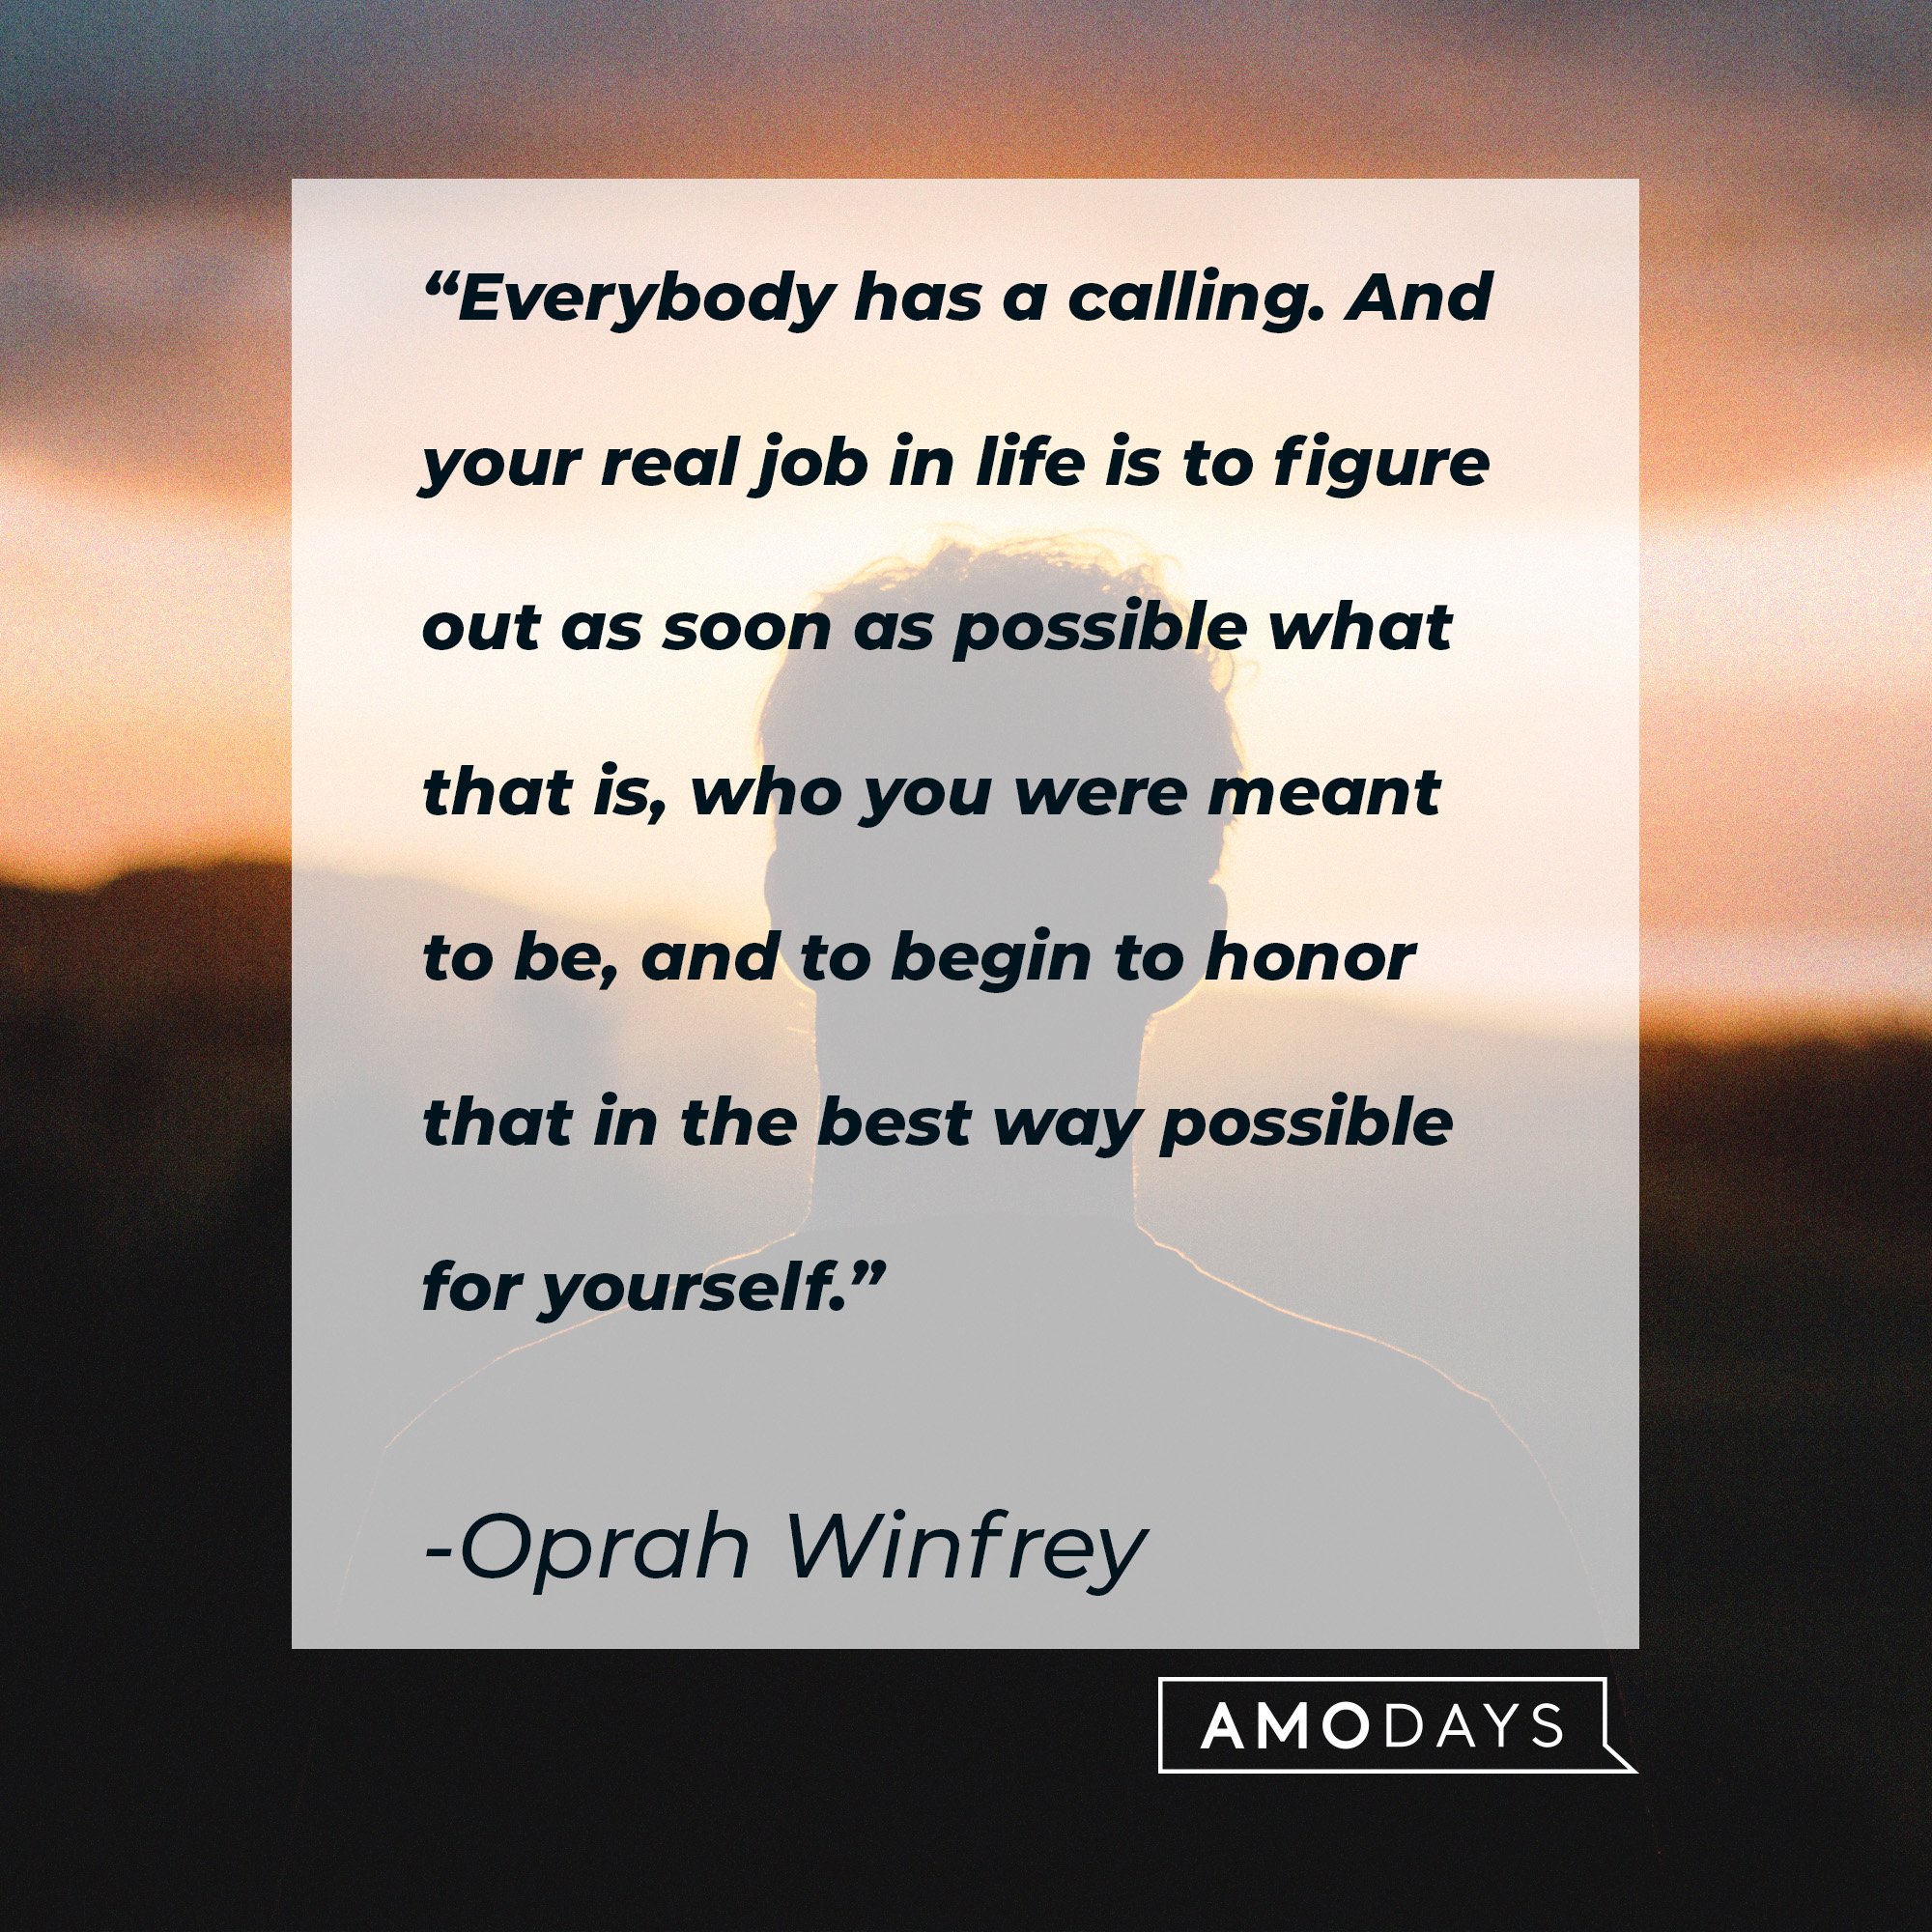 Oprah Winfrey's quote: “Everybody has a calling. And your real job in life is to figure out as soon as possible what that is, who you were meant to be, and to begin to honor that in the best way possible for yourself.” | Image: AmoDays